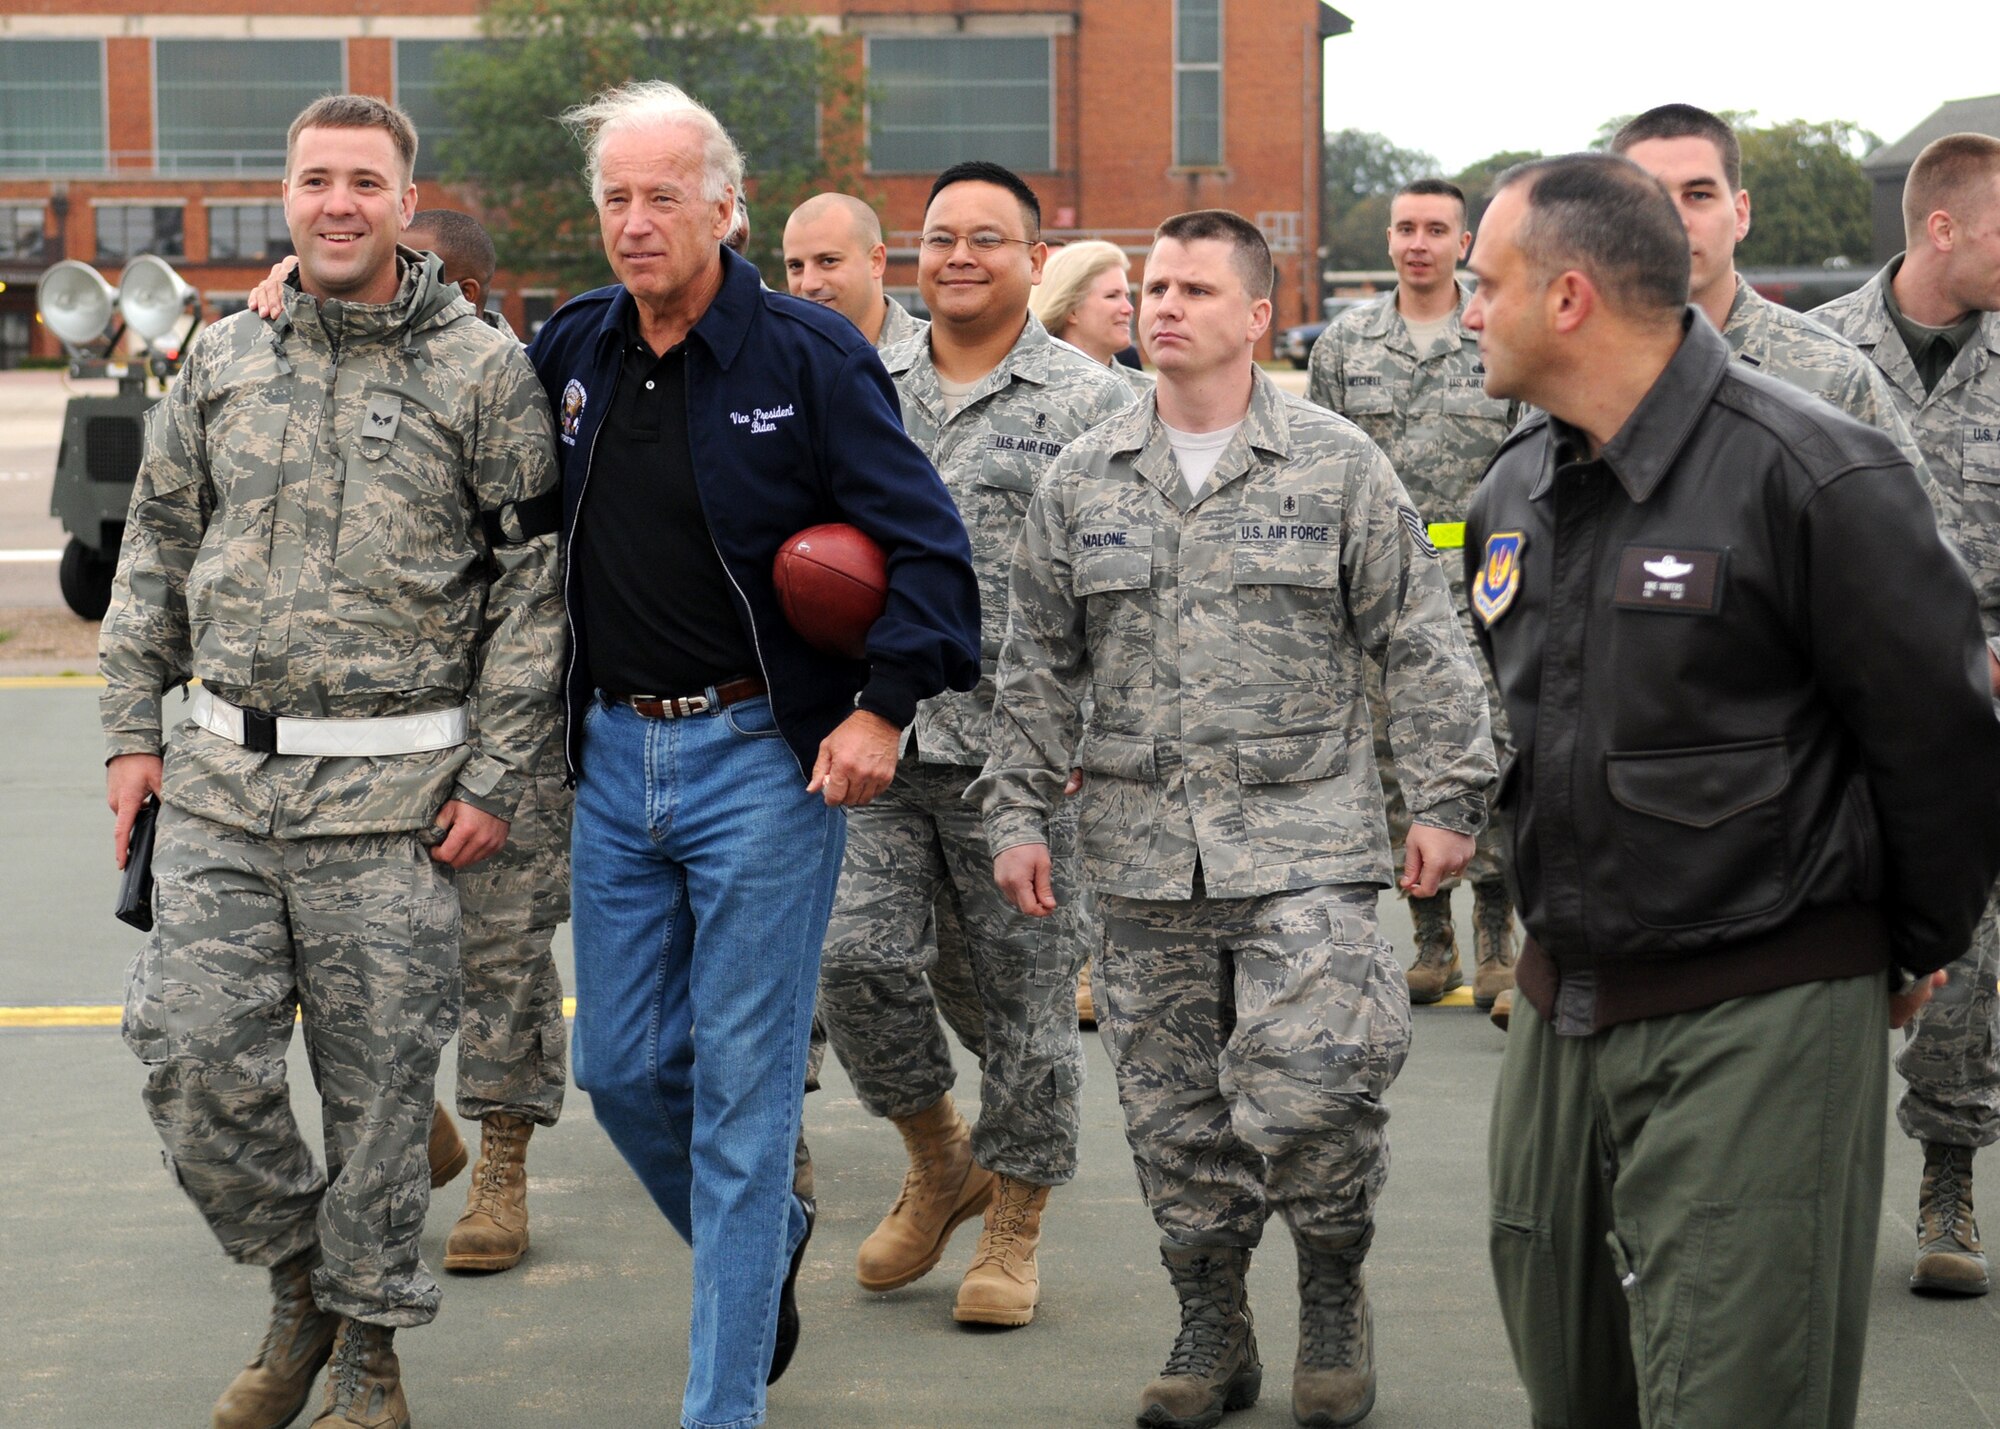 RAF MILDENHALL, England - Vice President Joe Biden talks with a group of Airmen thanking them for their service and support during his brief visit Sept. 15. (U.S. Air Force photo by Staff Sgt. Jerry Fleshman)